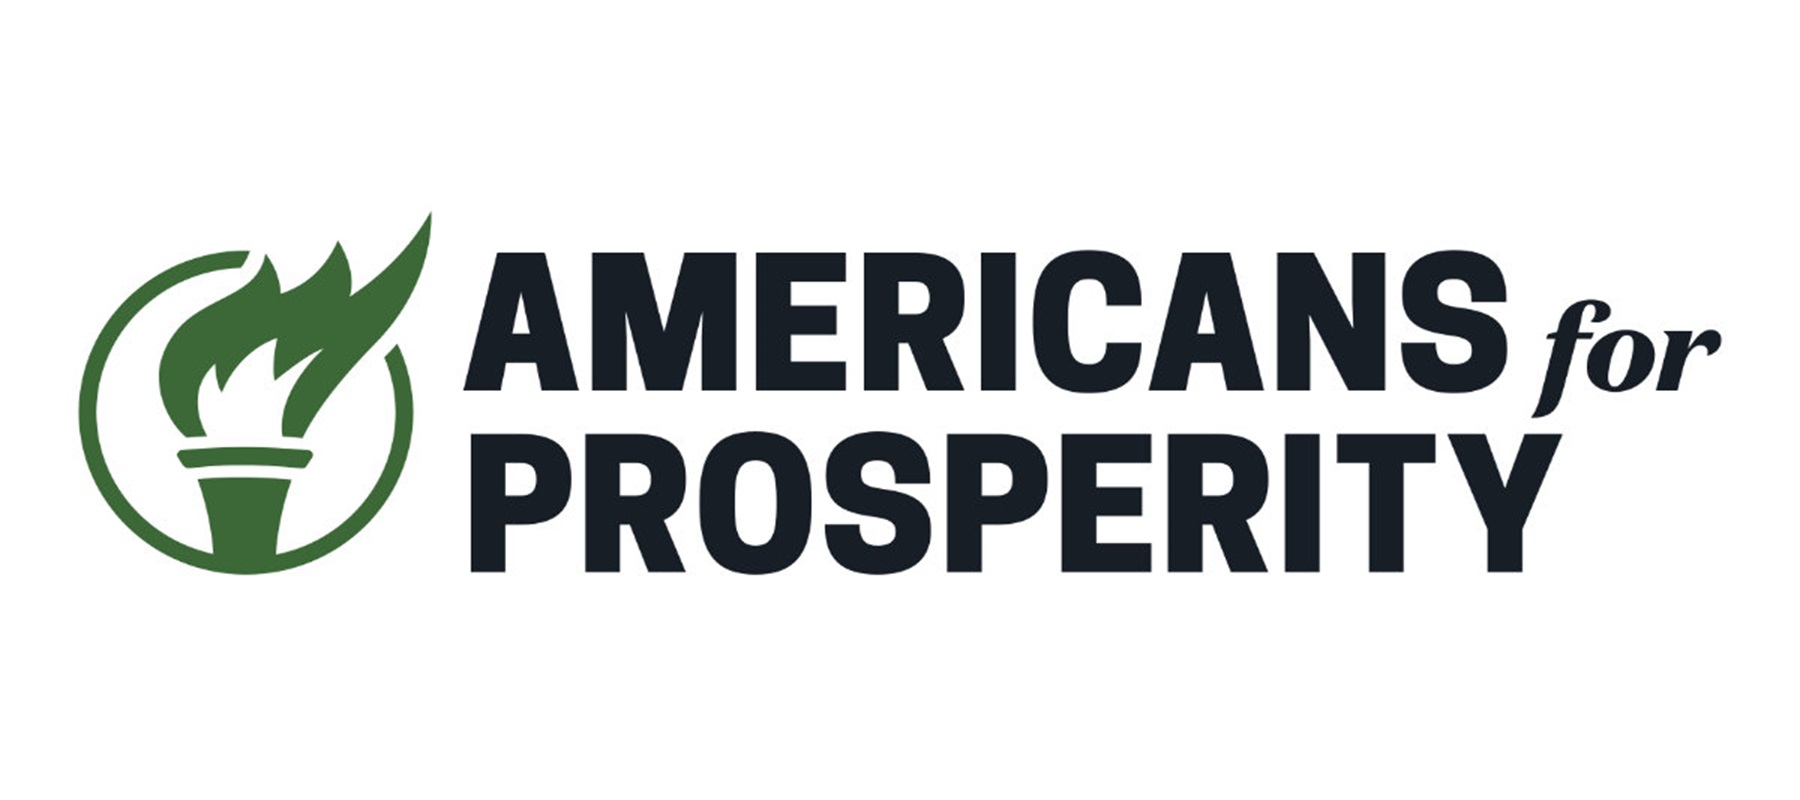 Americans for Prosperity launches new ad campaign in support of tax-free health savings account act